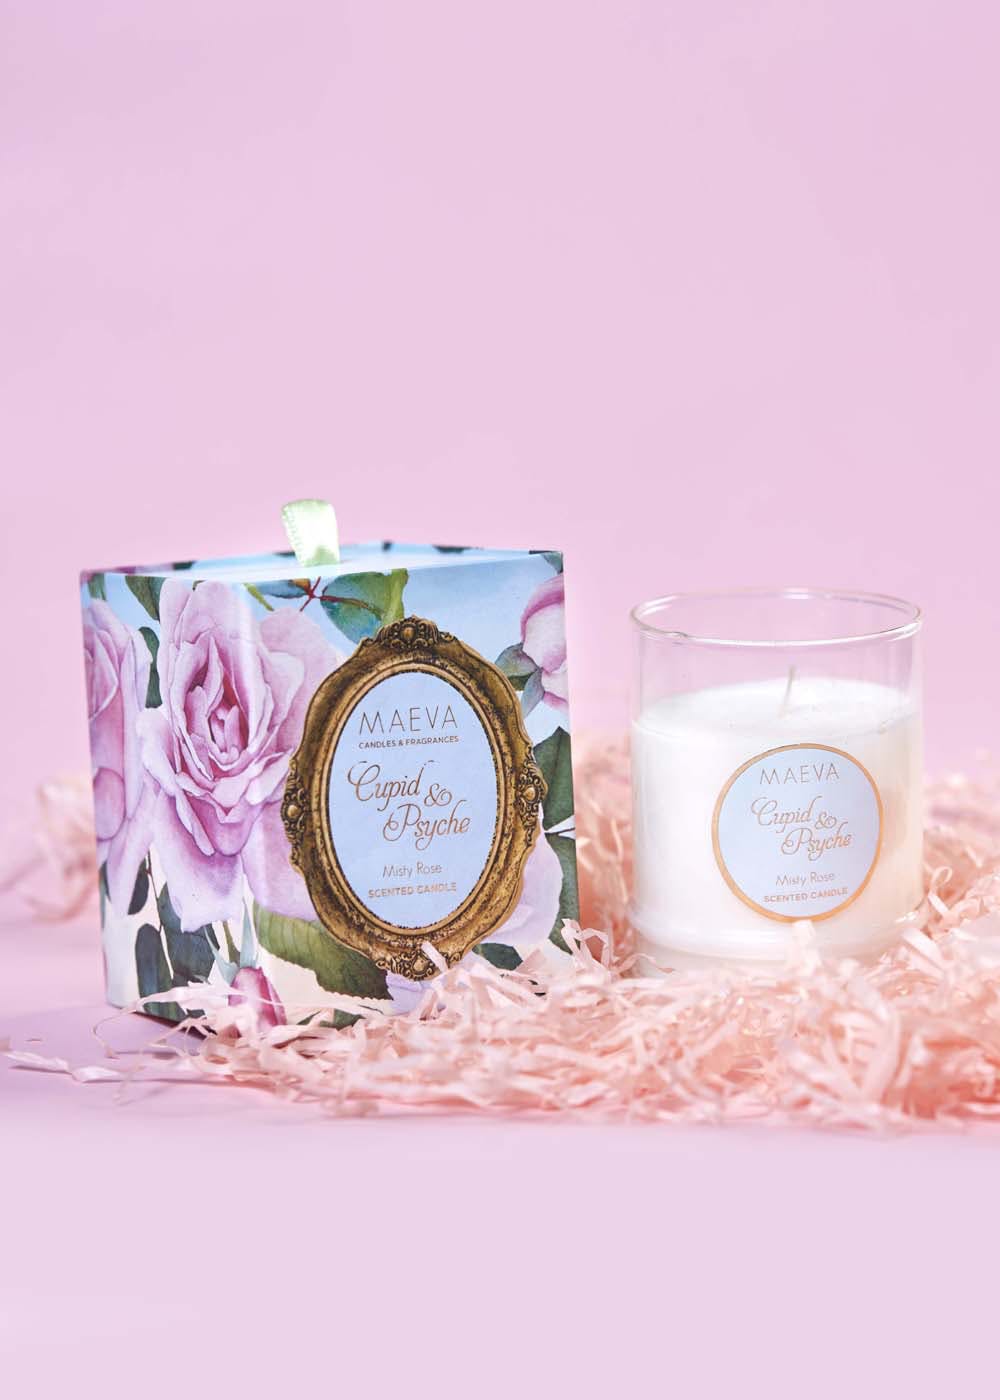 Cupid & Psyche Tumbler Scented Candle